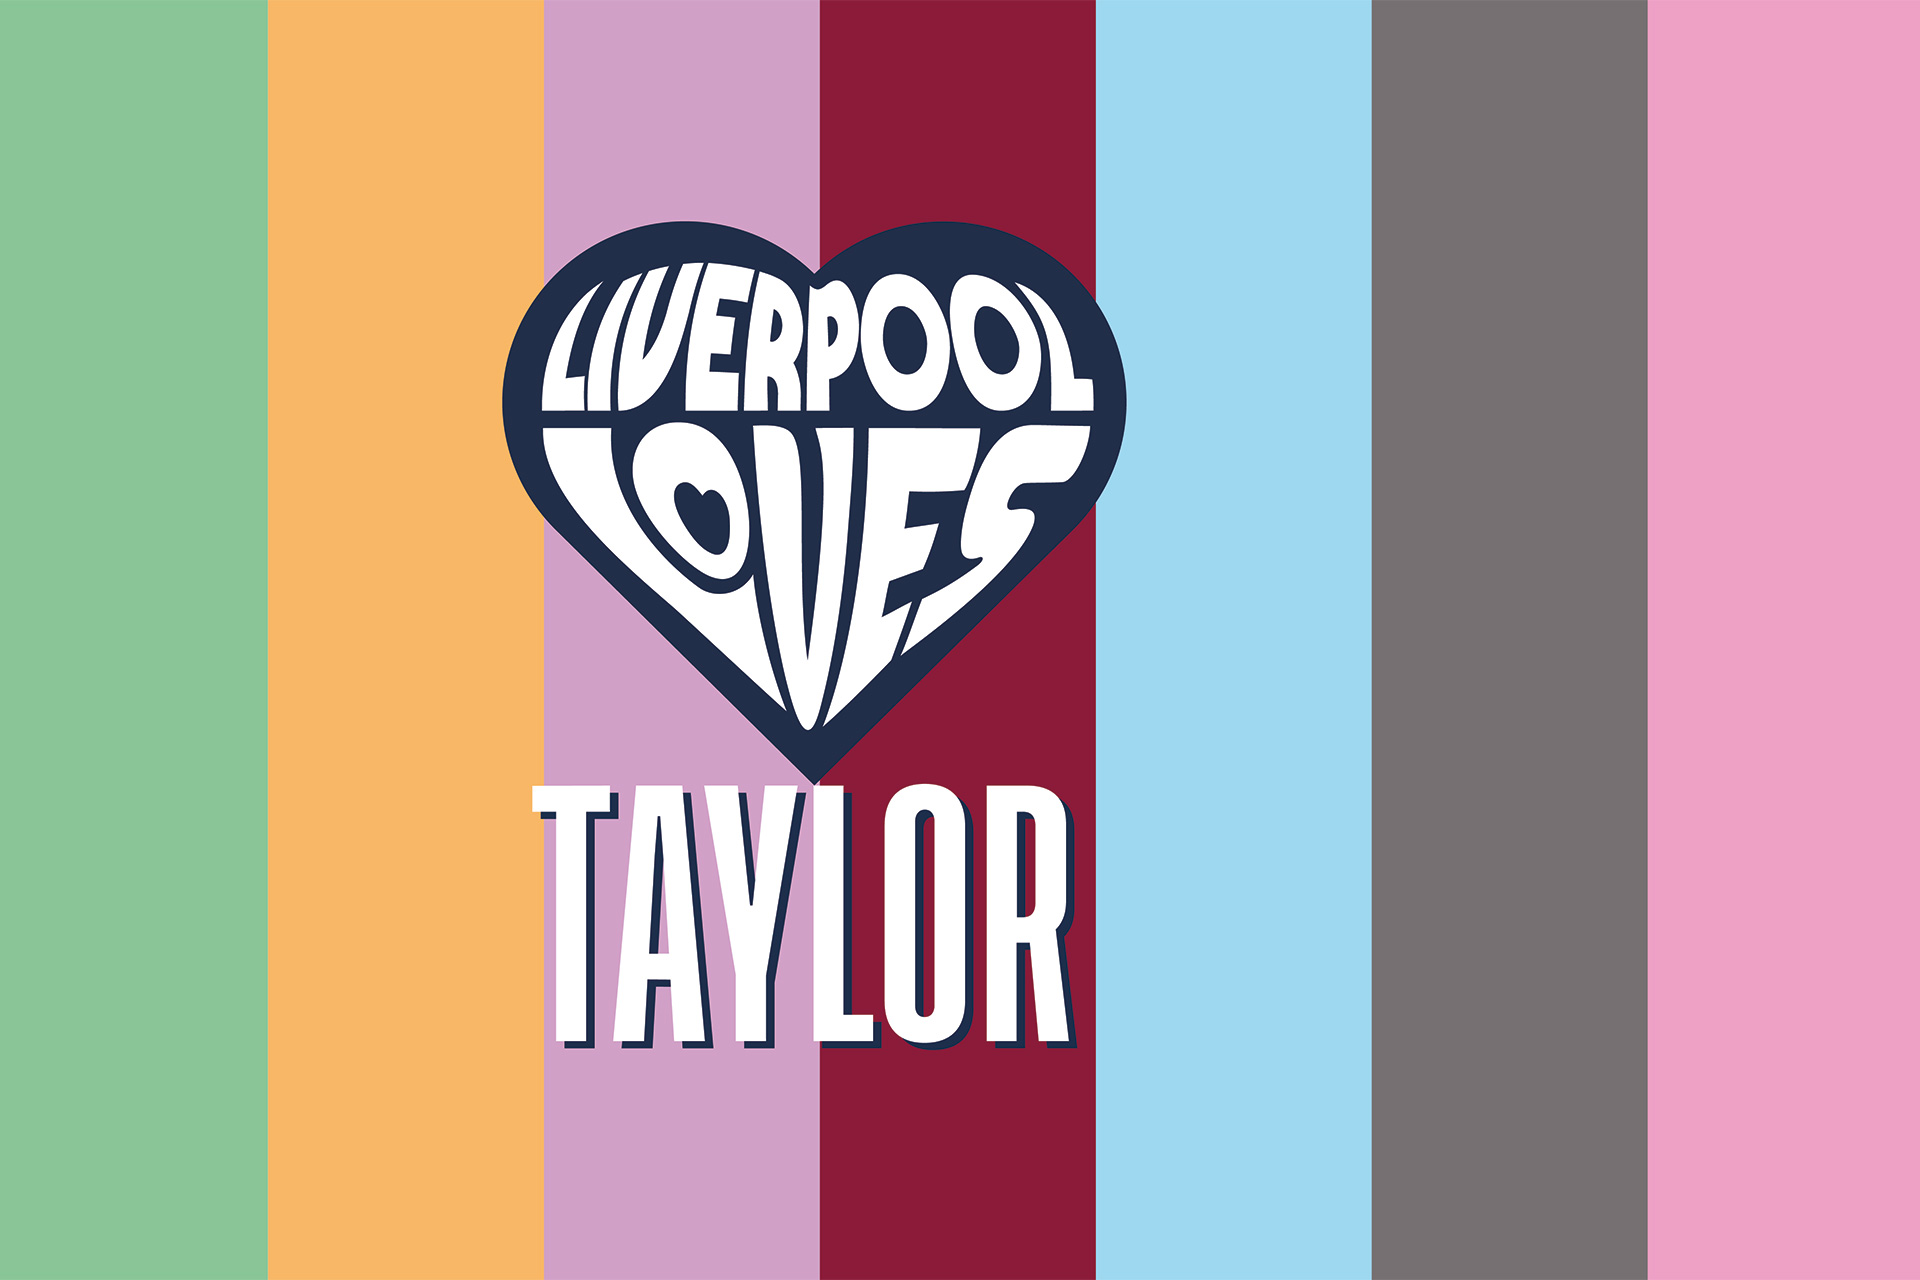 Liverpool Loves Taylor logo against a background of vertical stripes of different colours.